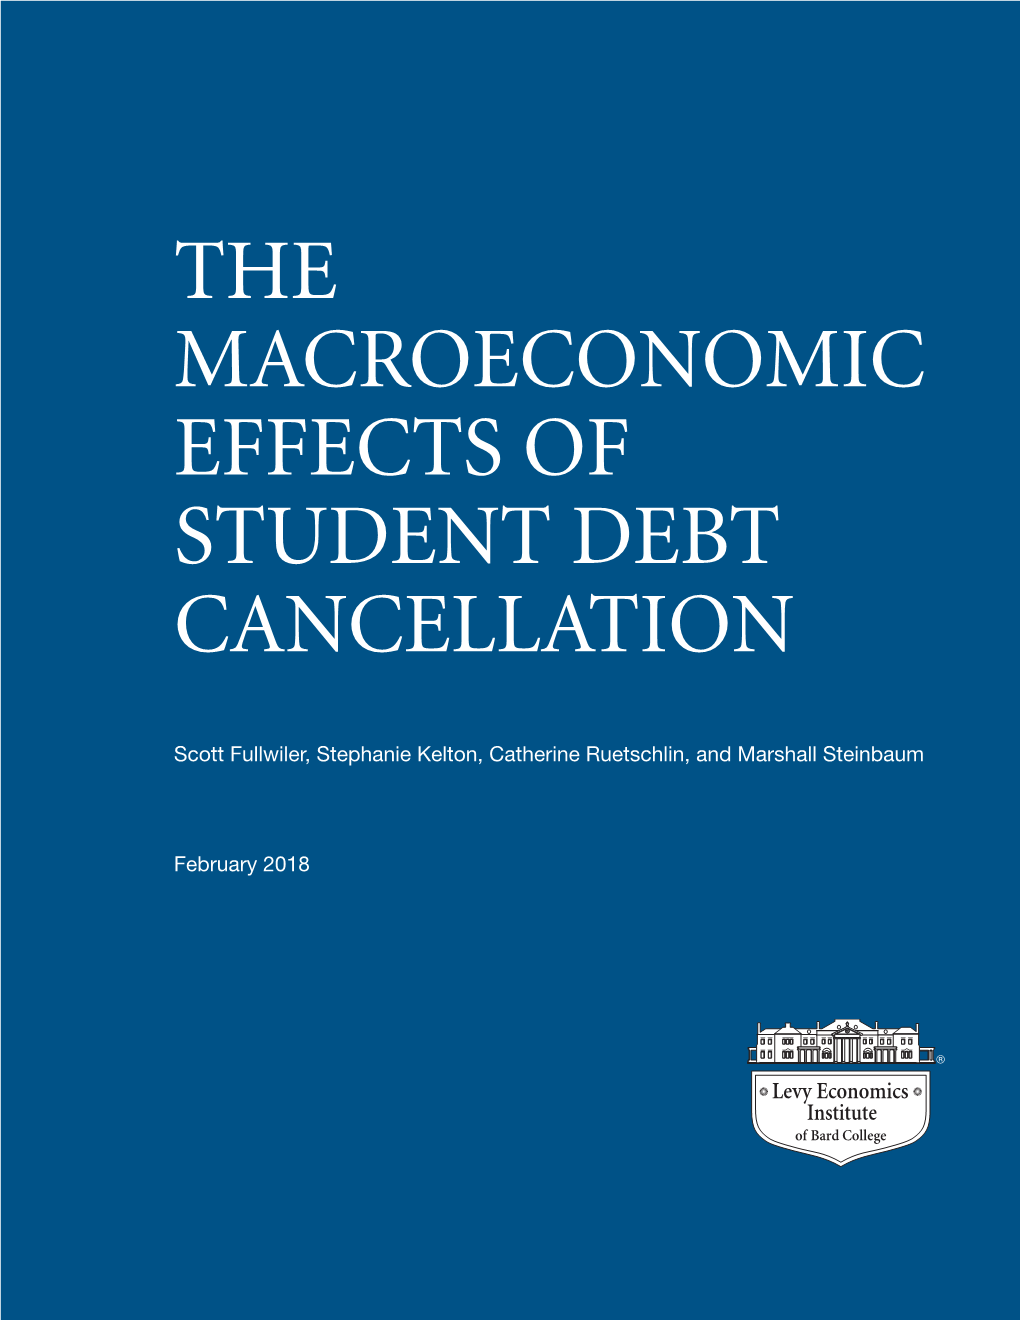 The Macroeconomic Effects of Student Debt Cancellation